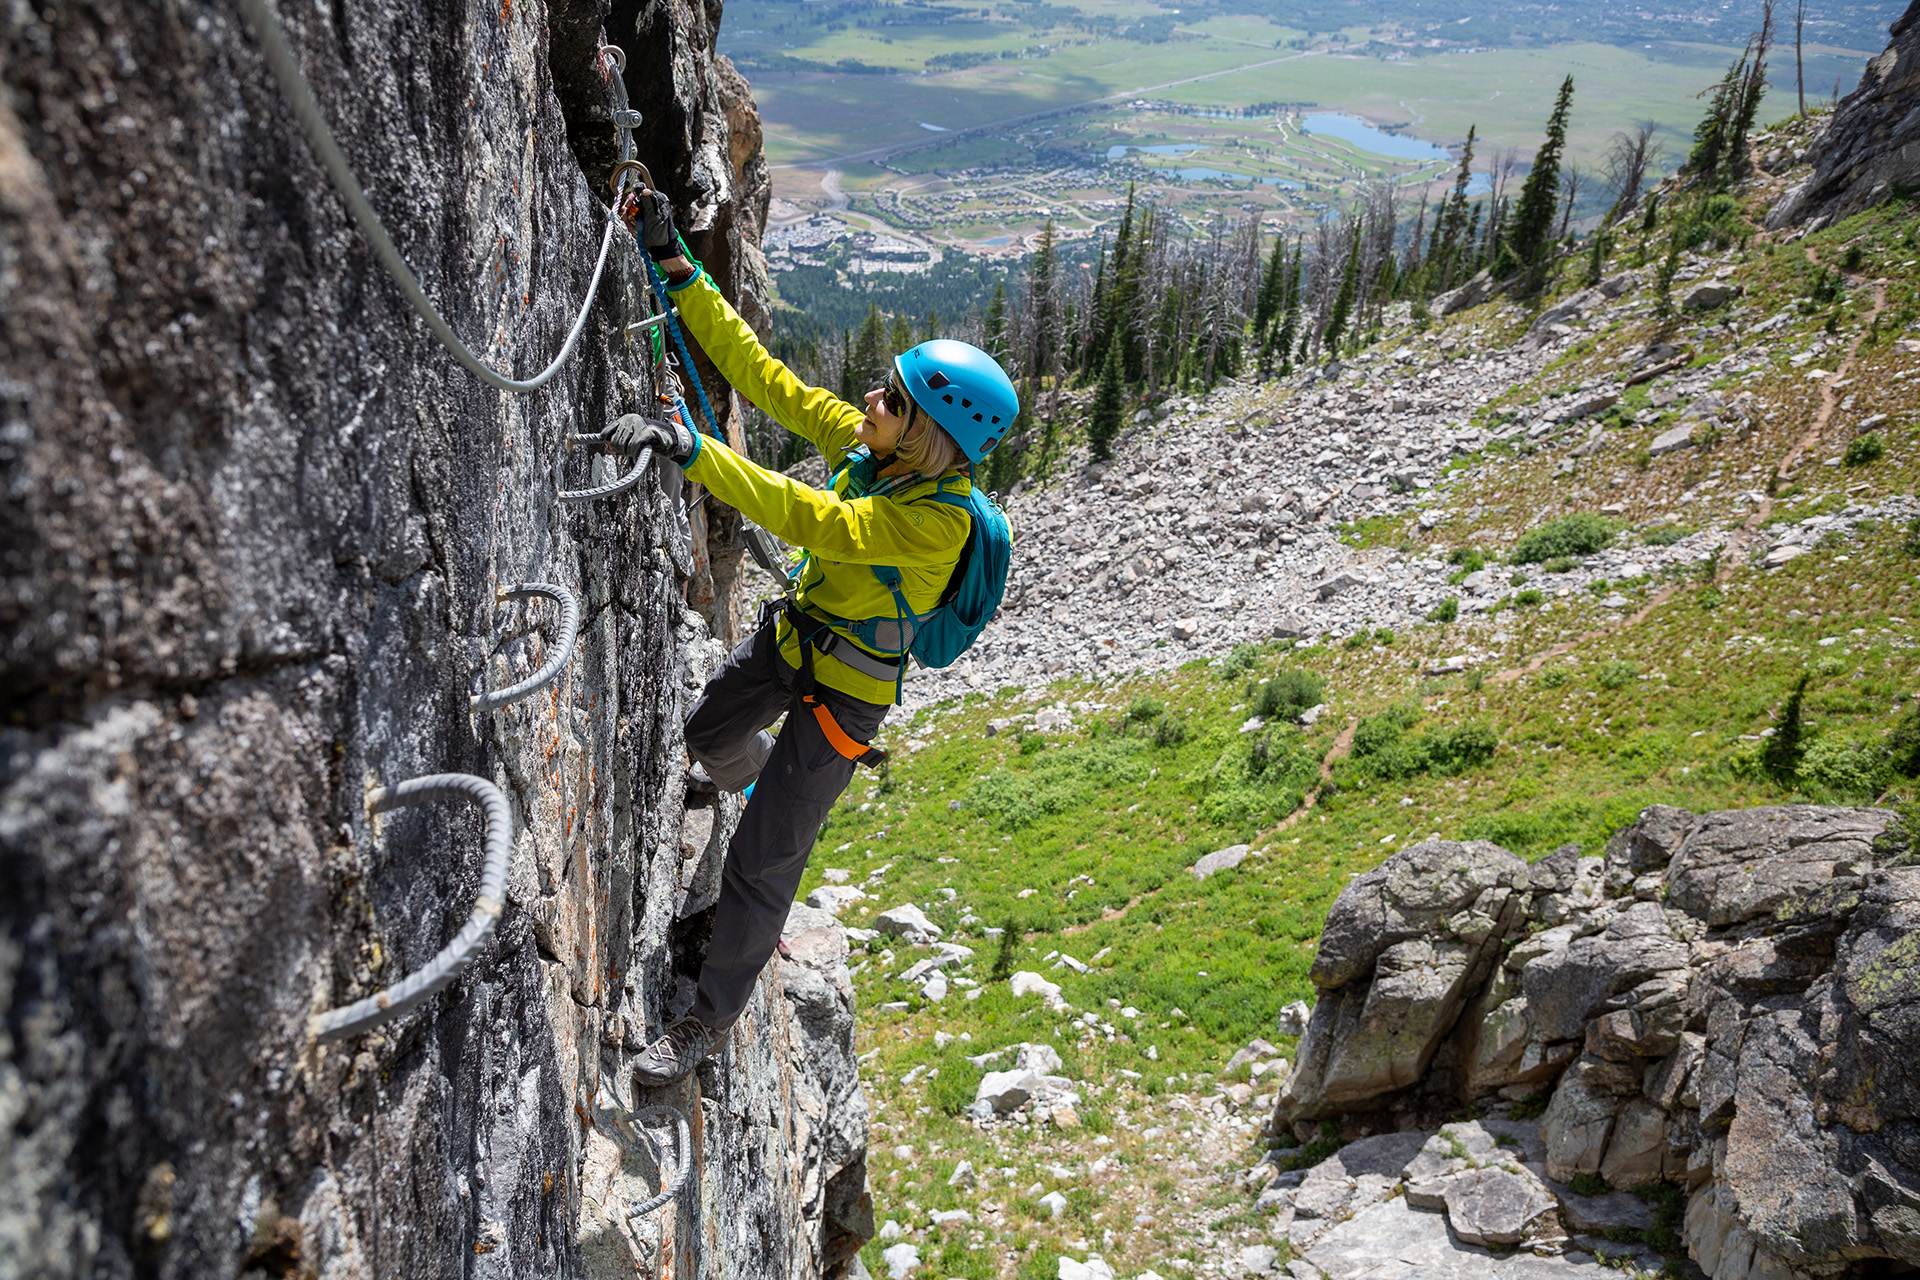 Connie Kemmerer hiking a challenging route on the Via Ferrata